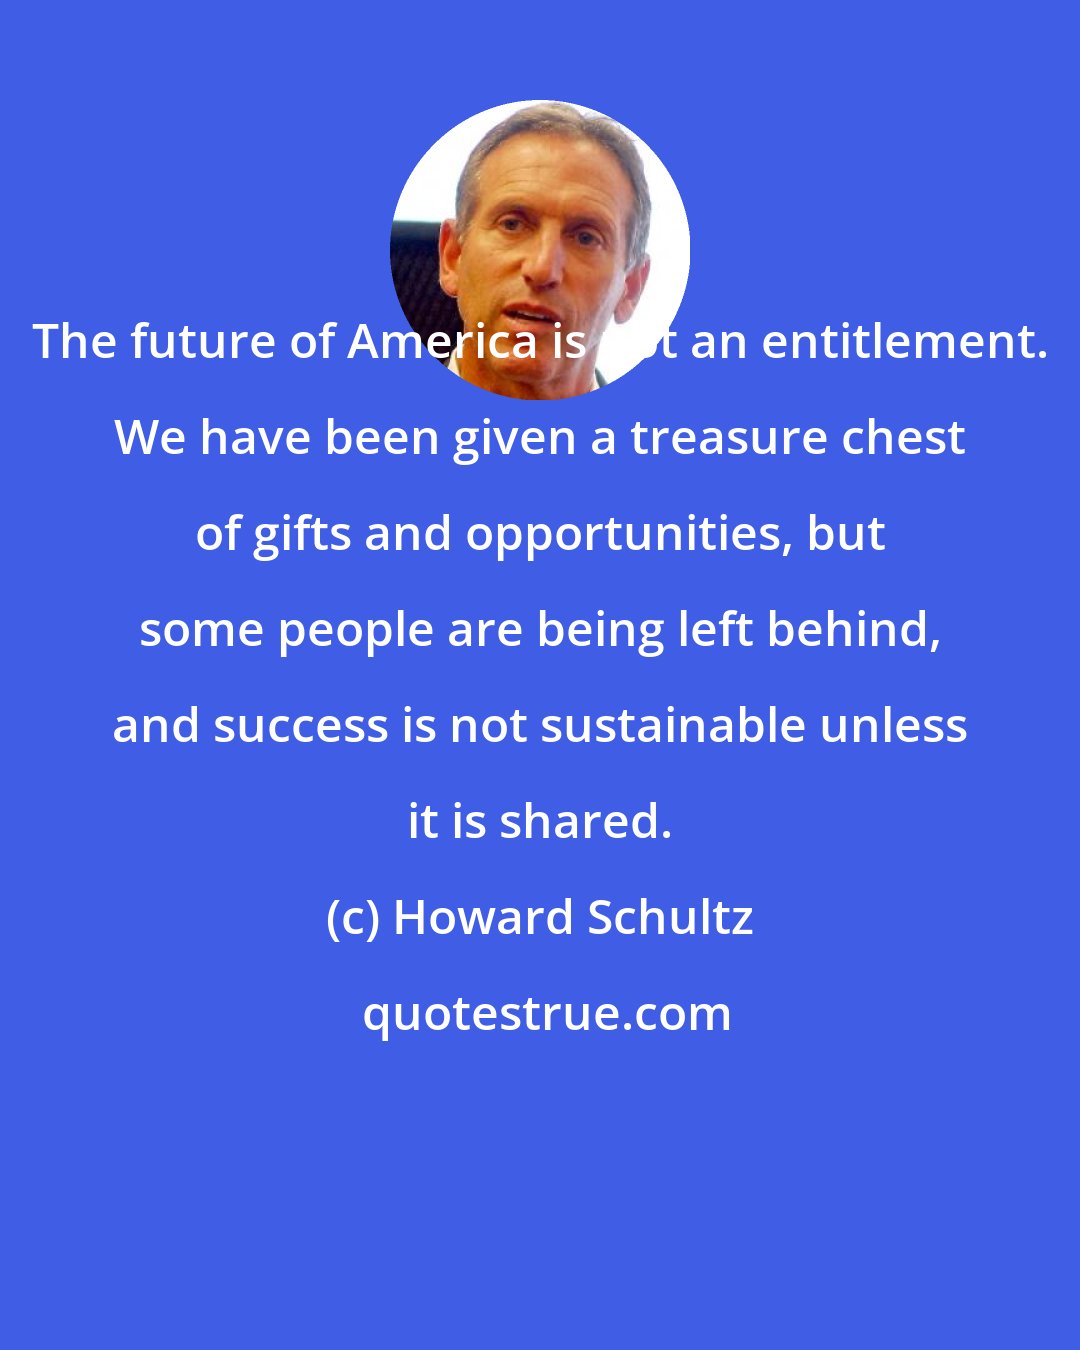 Howard Schultz: The future of America is not an entitlement. We have been given a treasure chest of gifts and opportunities, but some people are being left behind, and success is not sustainable unless it is shared.